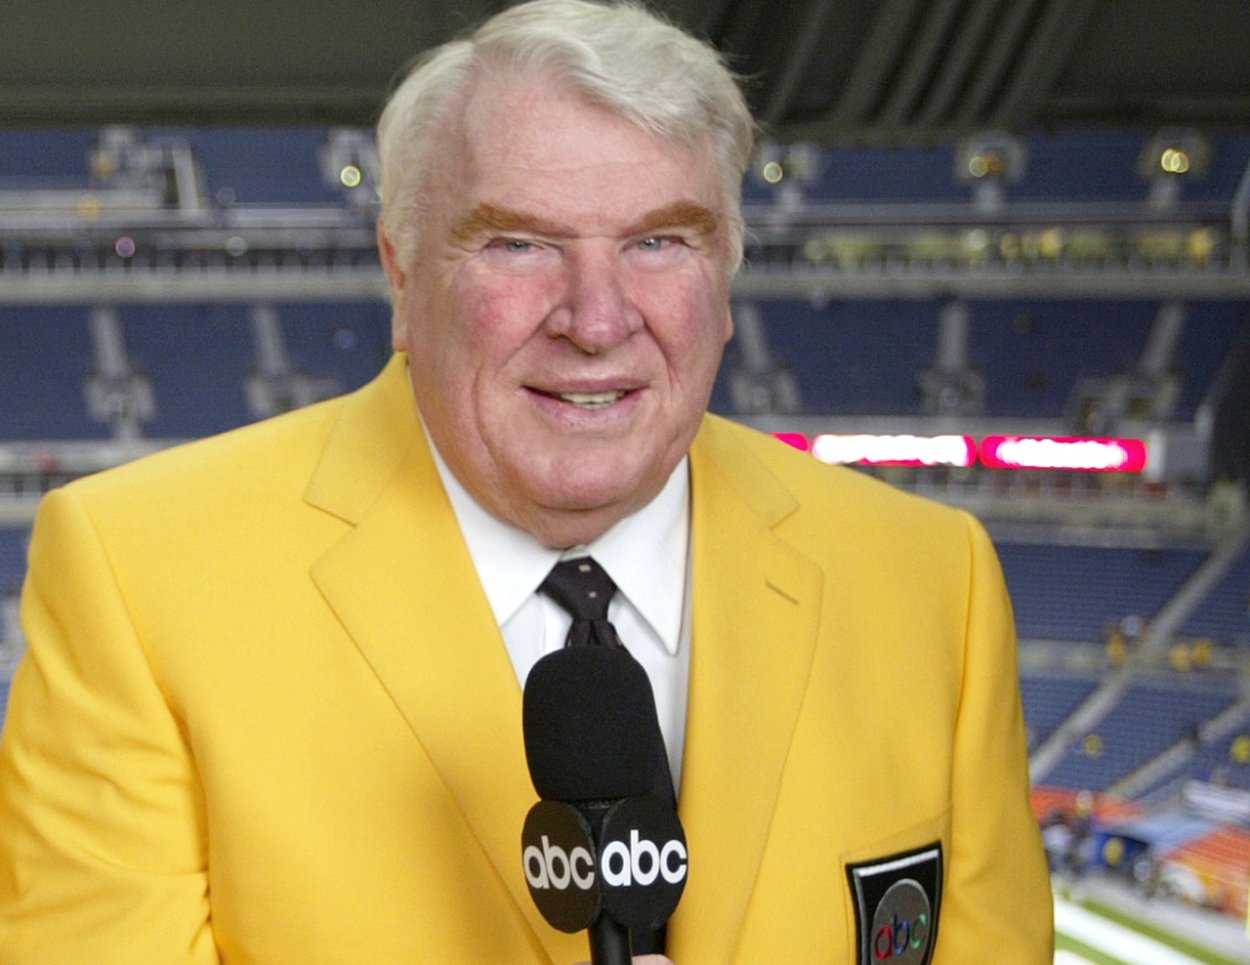 NFL legend John Madden holds the microphone while calling an NFL game in 200